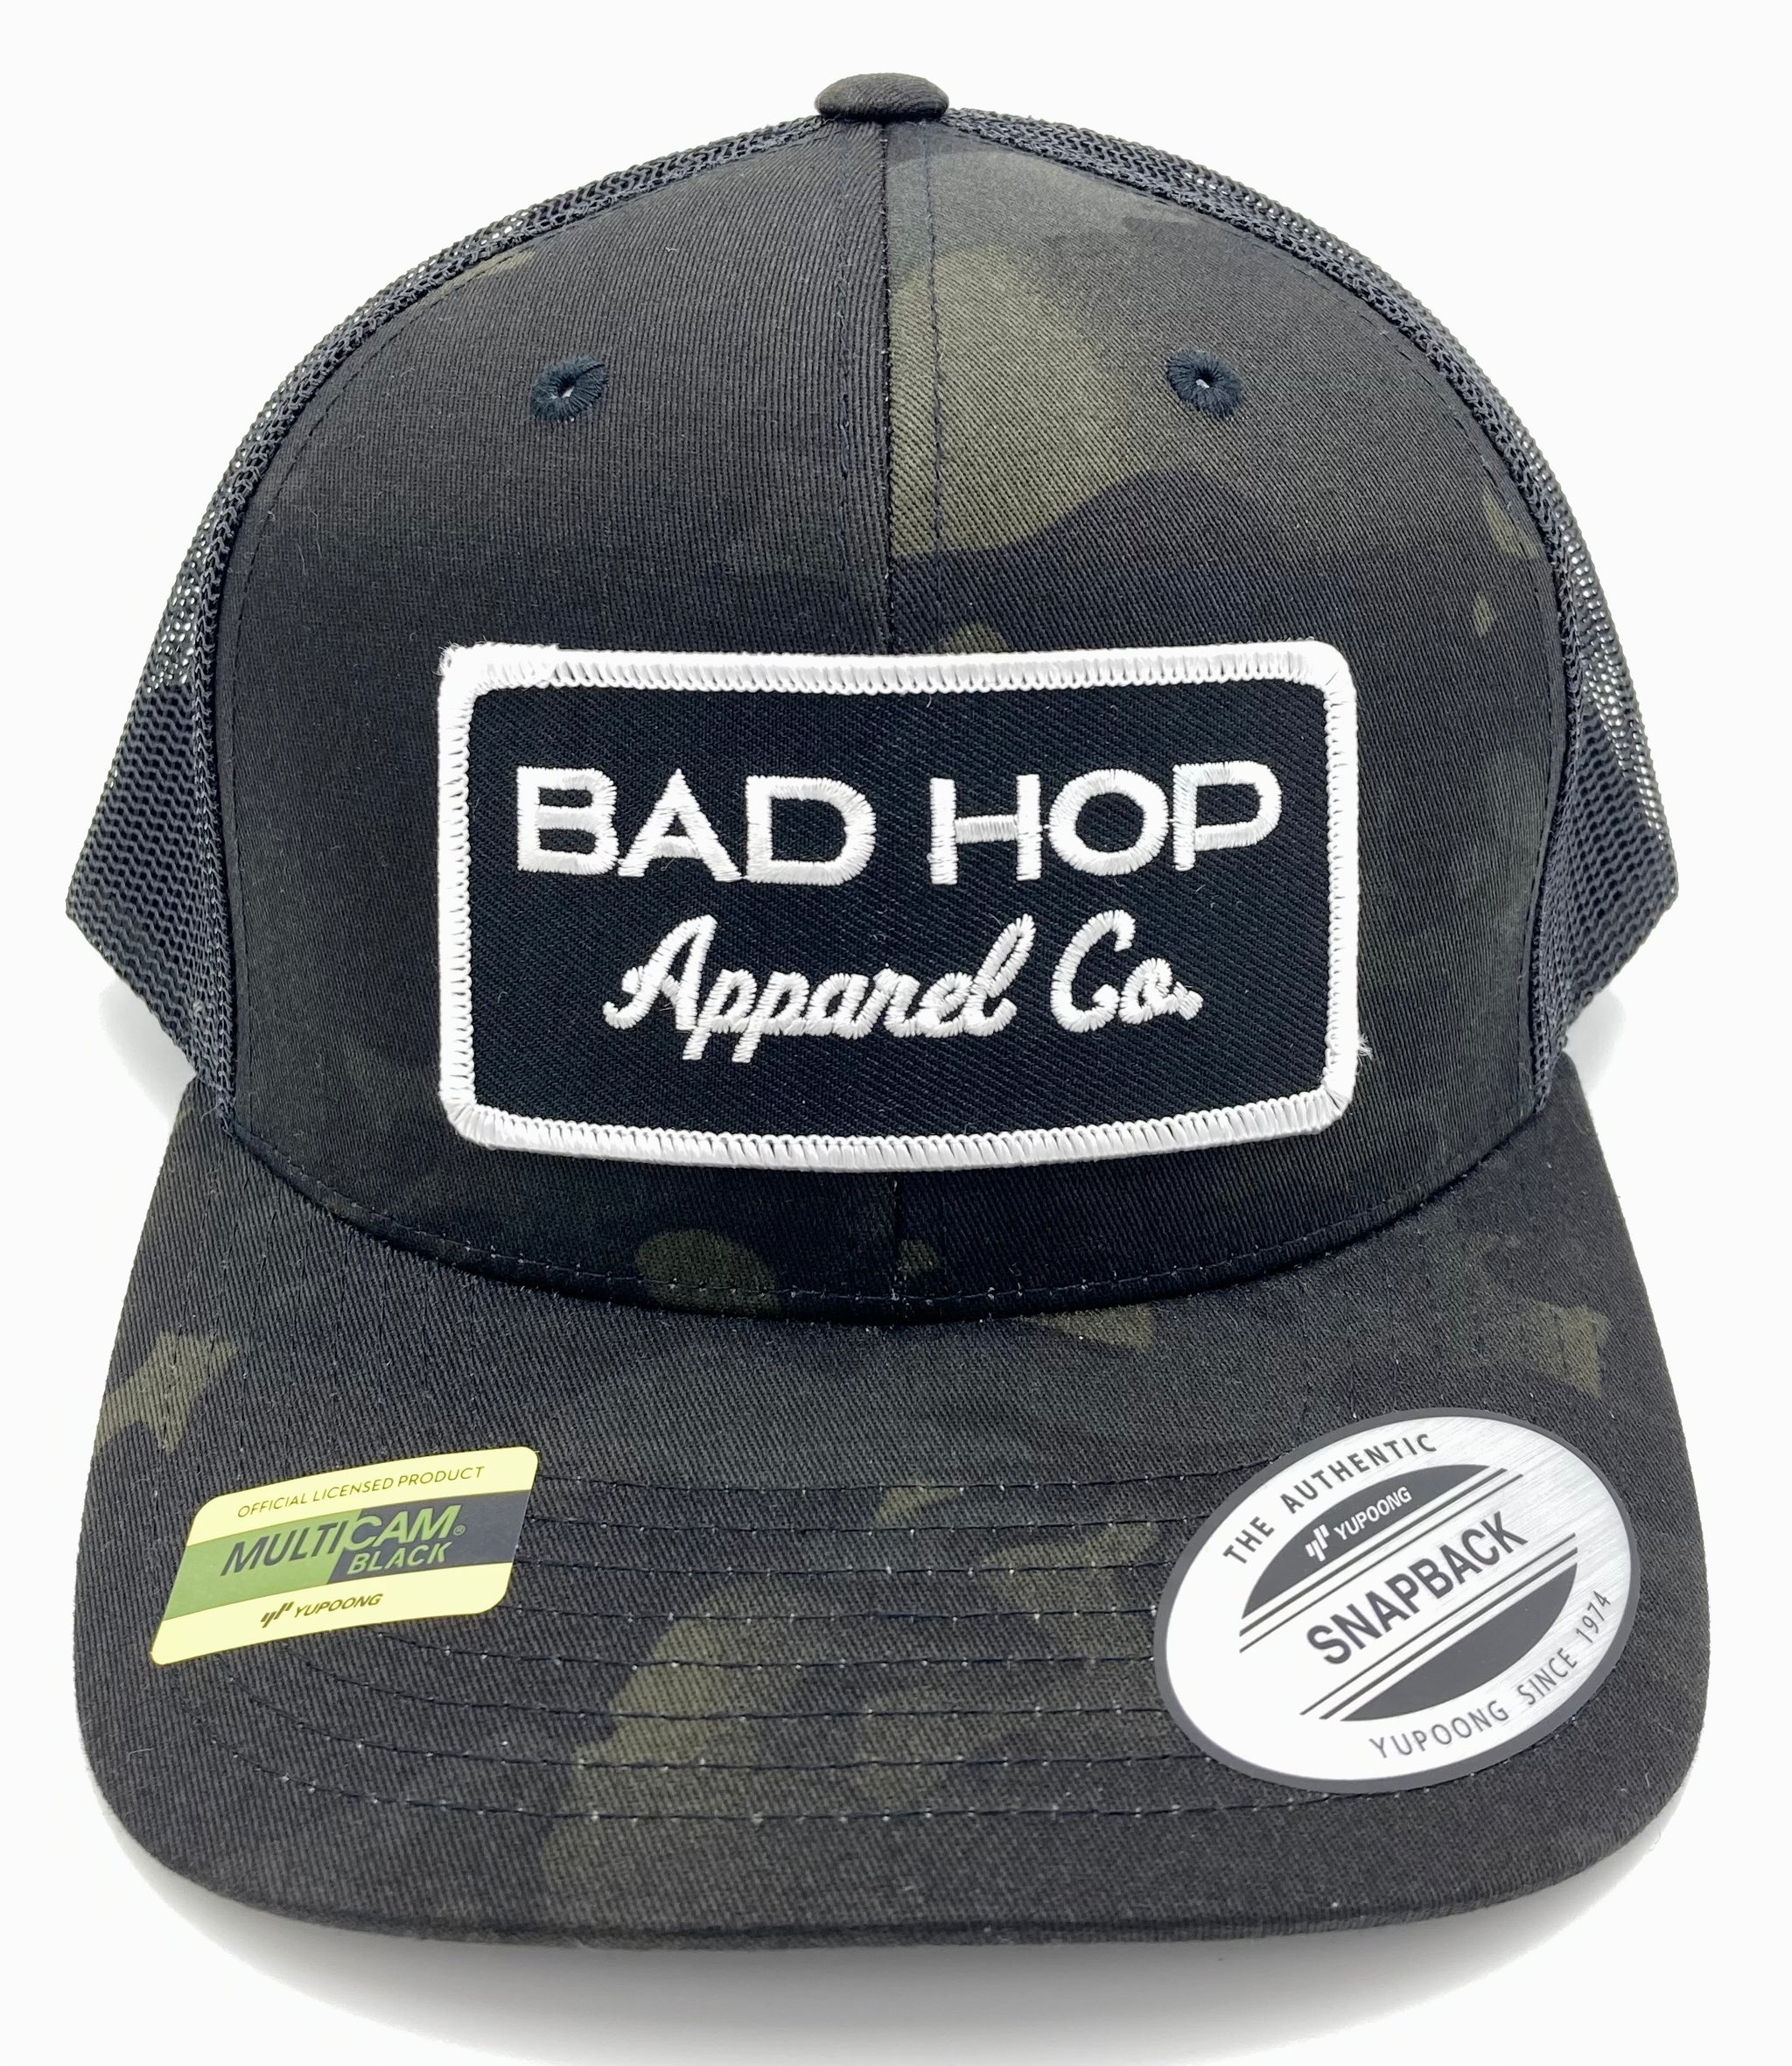 Bad Hop is a premium apparel and merchandise brand, that takes 